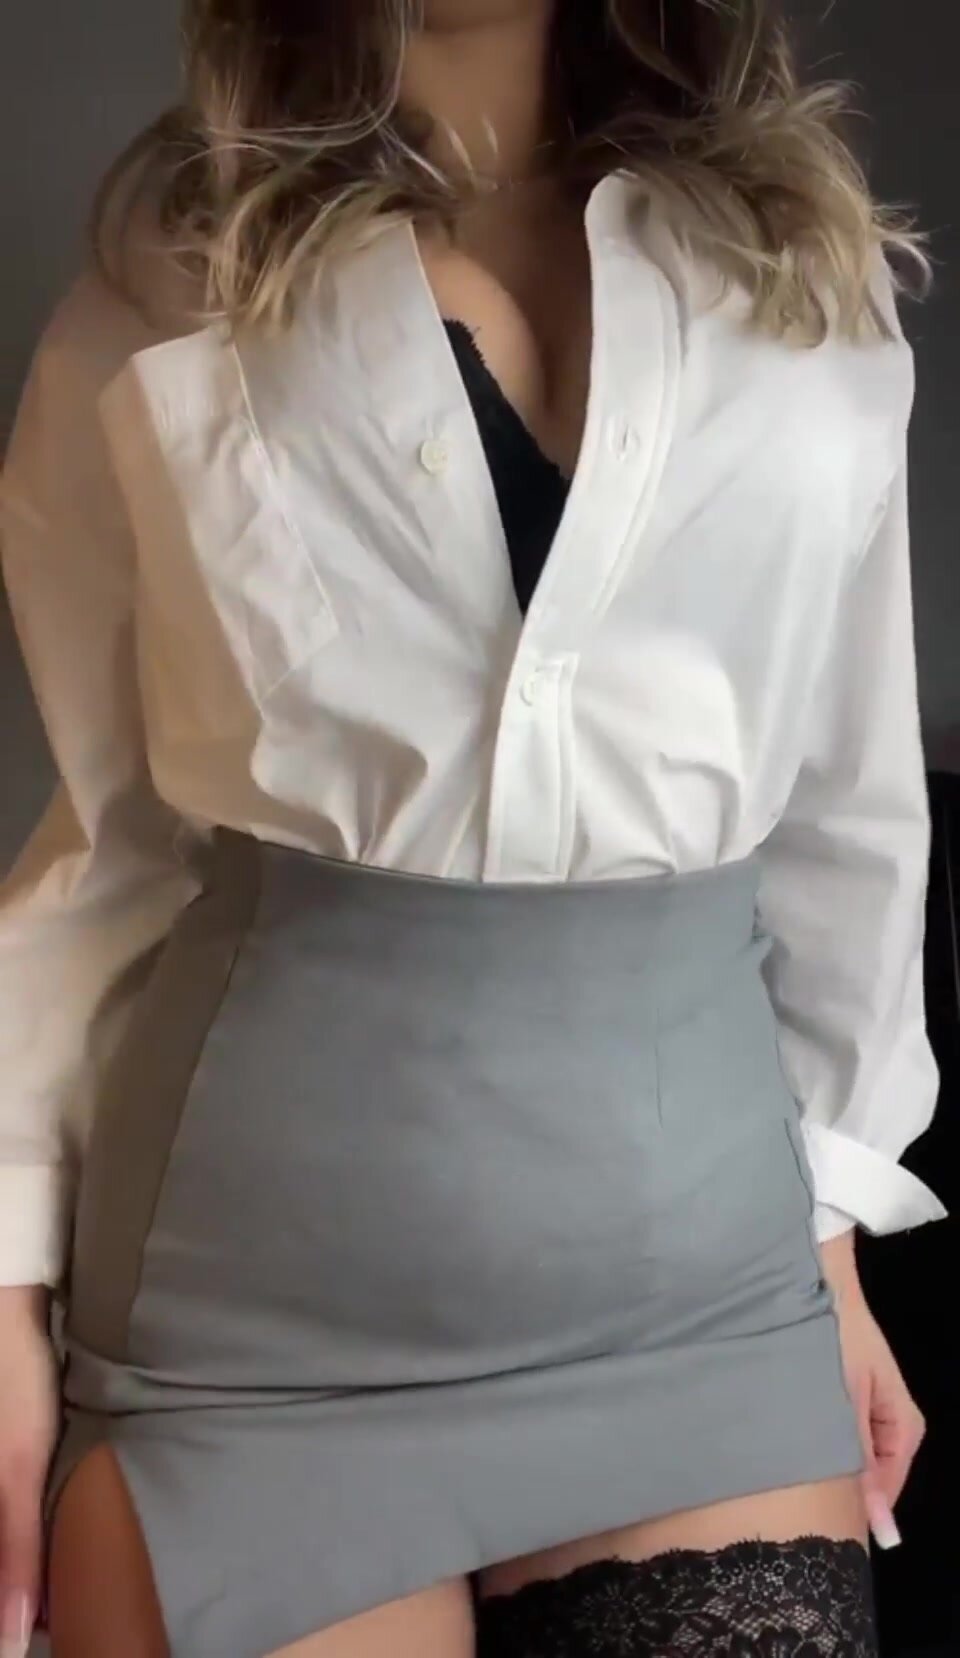 Can I be your sexy secretary?